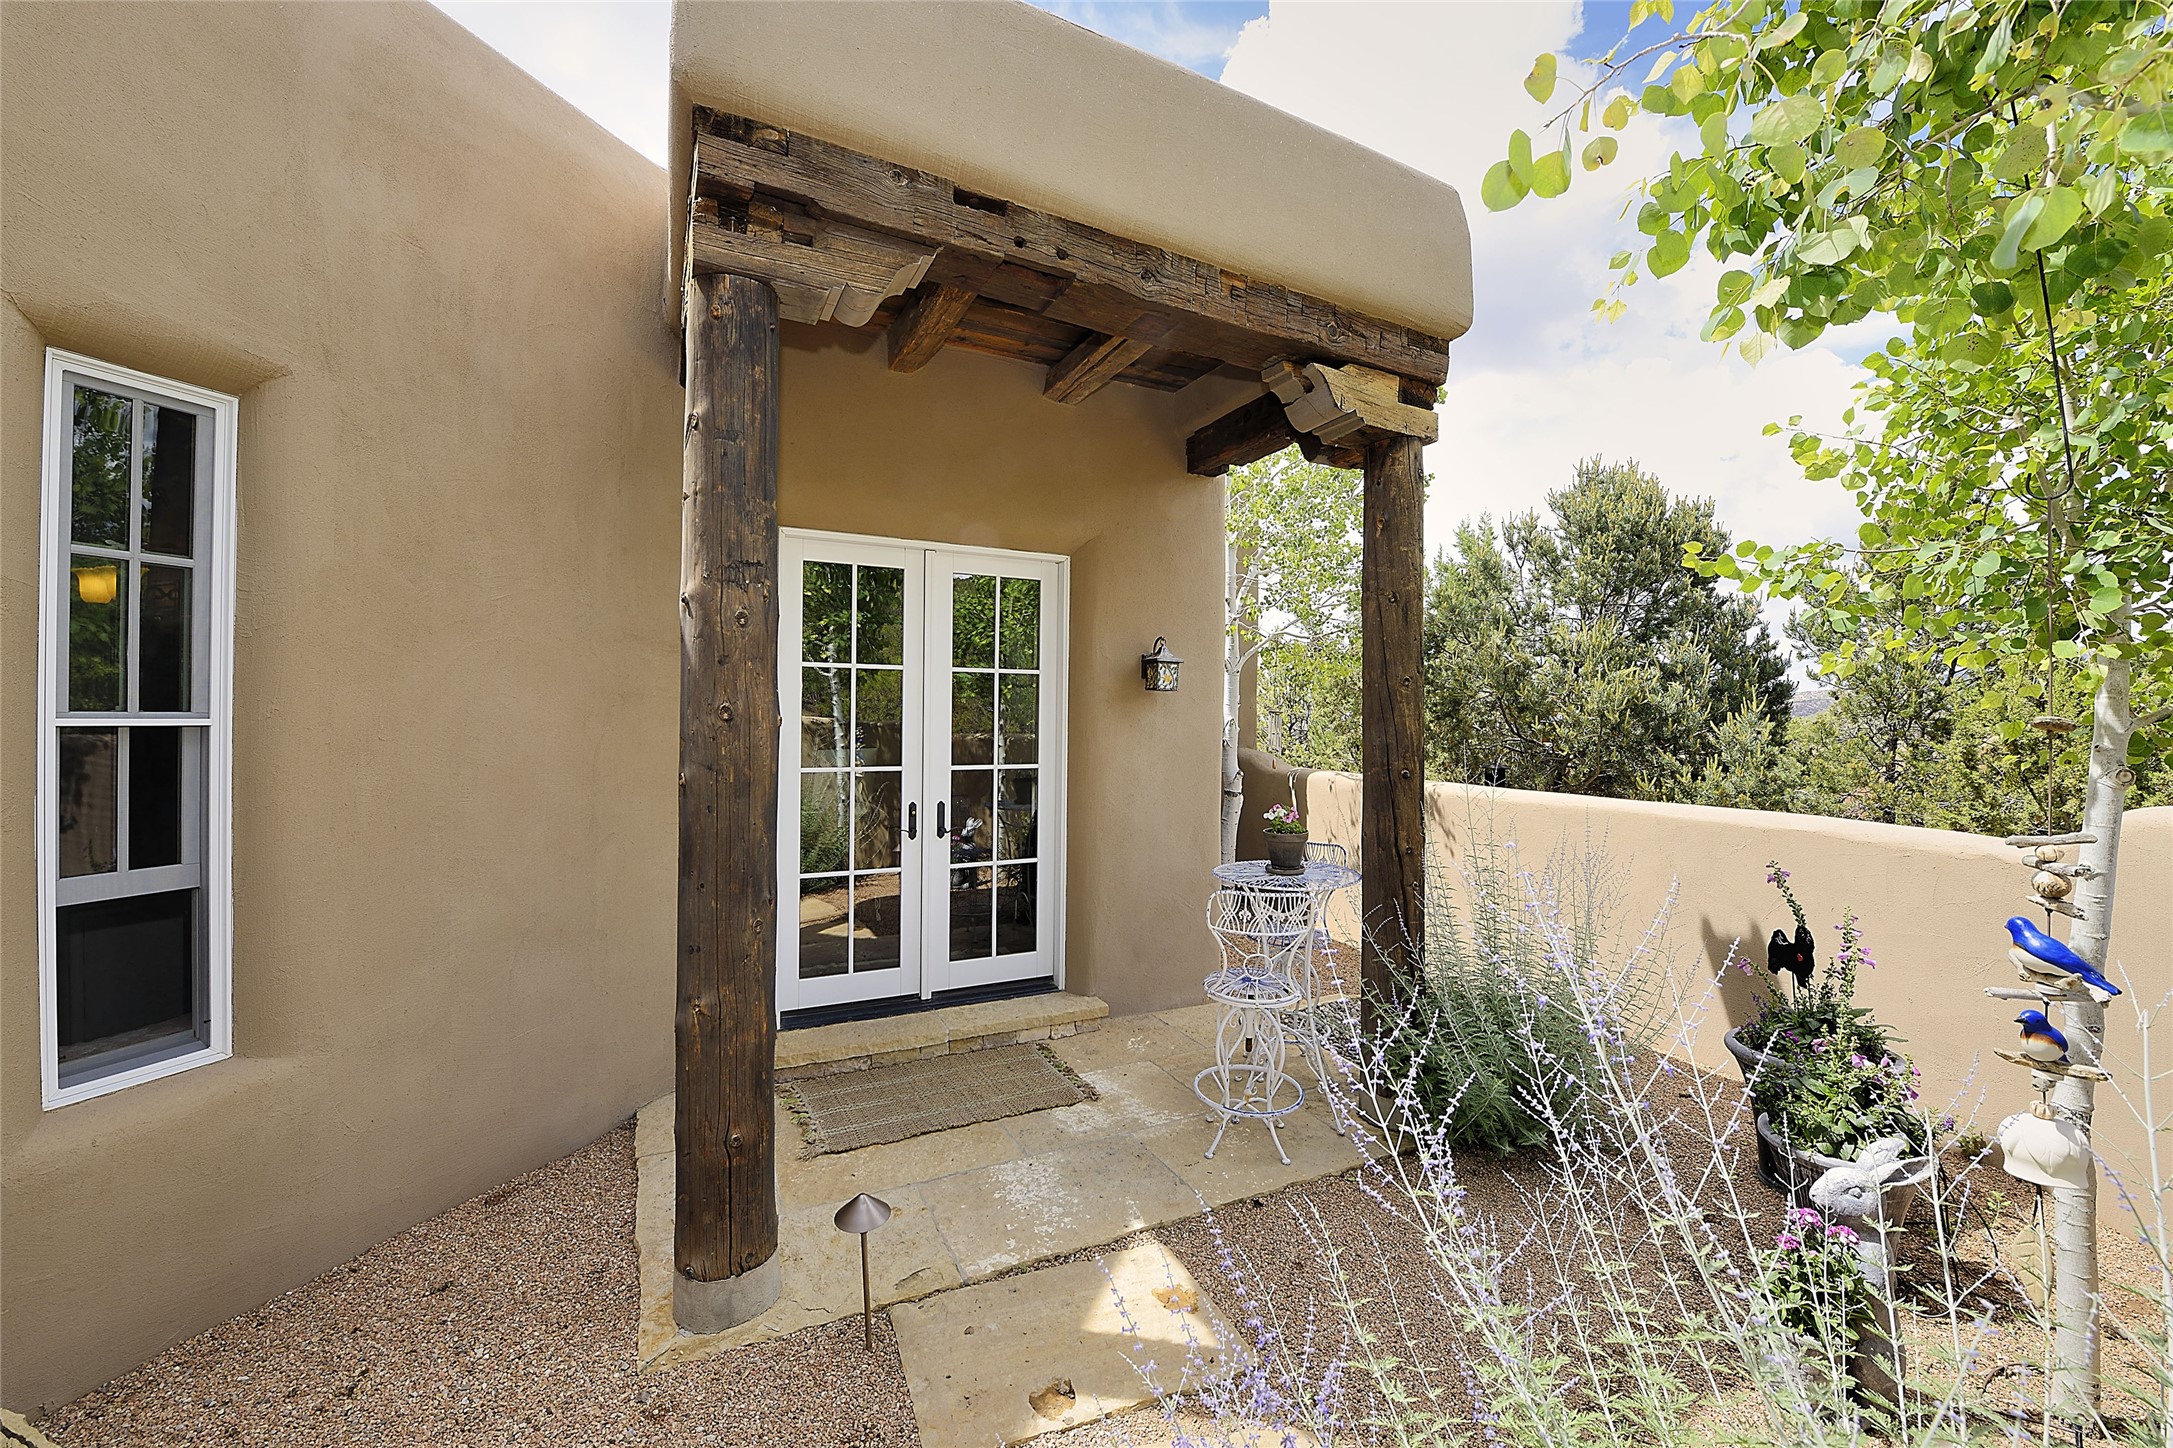 52 Lodge Trail, Santa Fe, New Mexico 87506, 3 Bedrooms Bedrooms, ,4 BathroomsBathrooms,Residential,For Sale,52 Lodge Trail,202401510